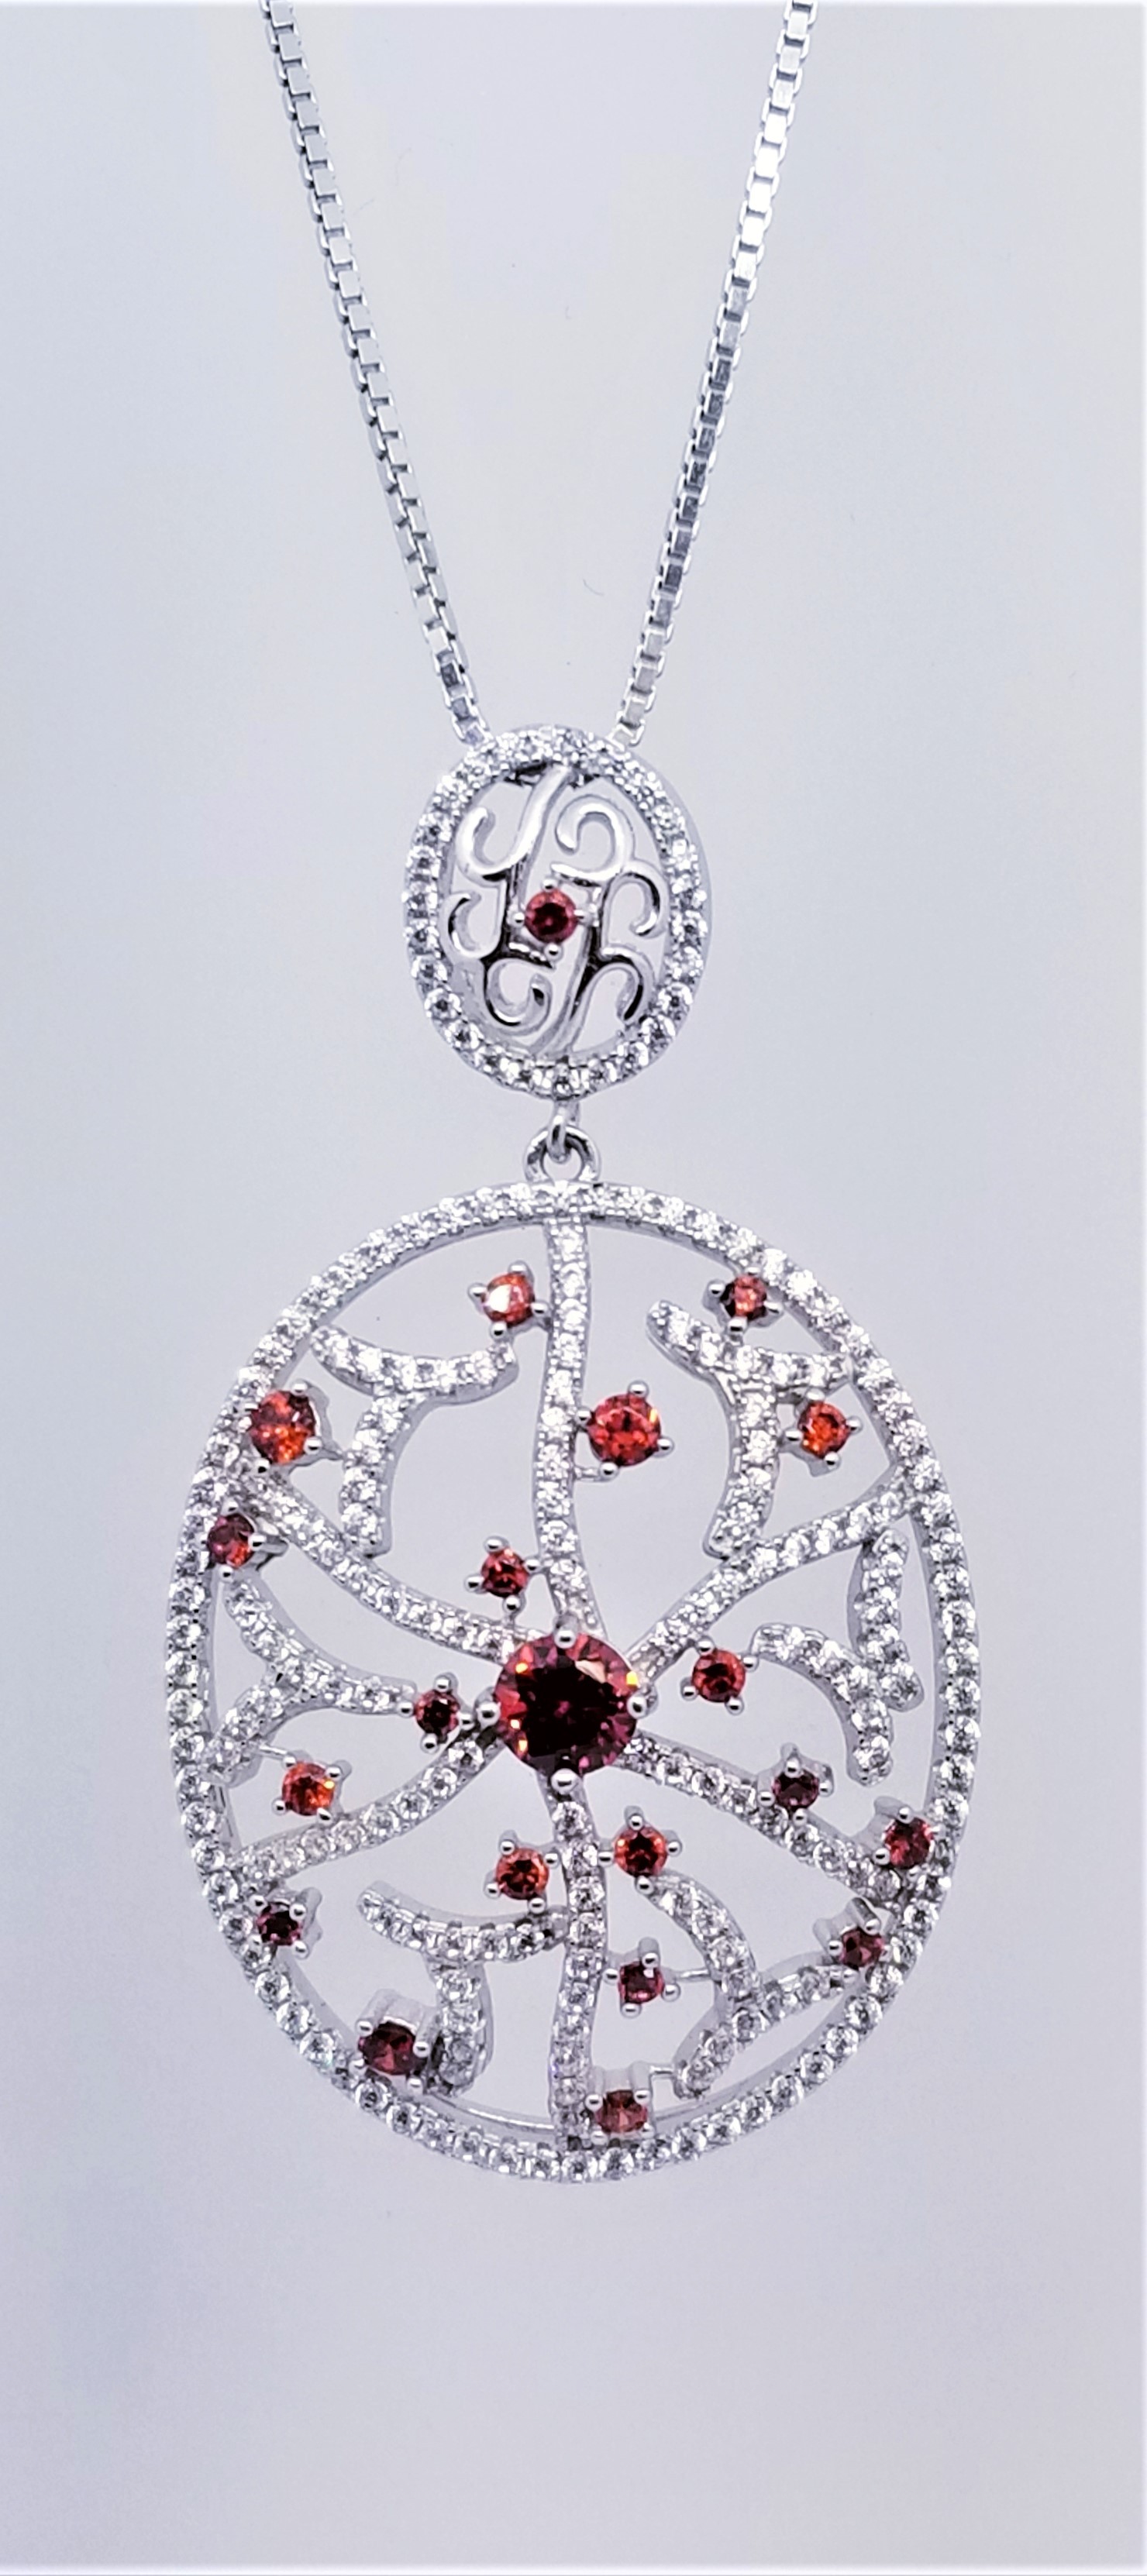 925 Sterling Silver Rhodium Tone Pendant With CZ And Garnet Stones